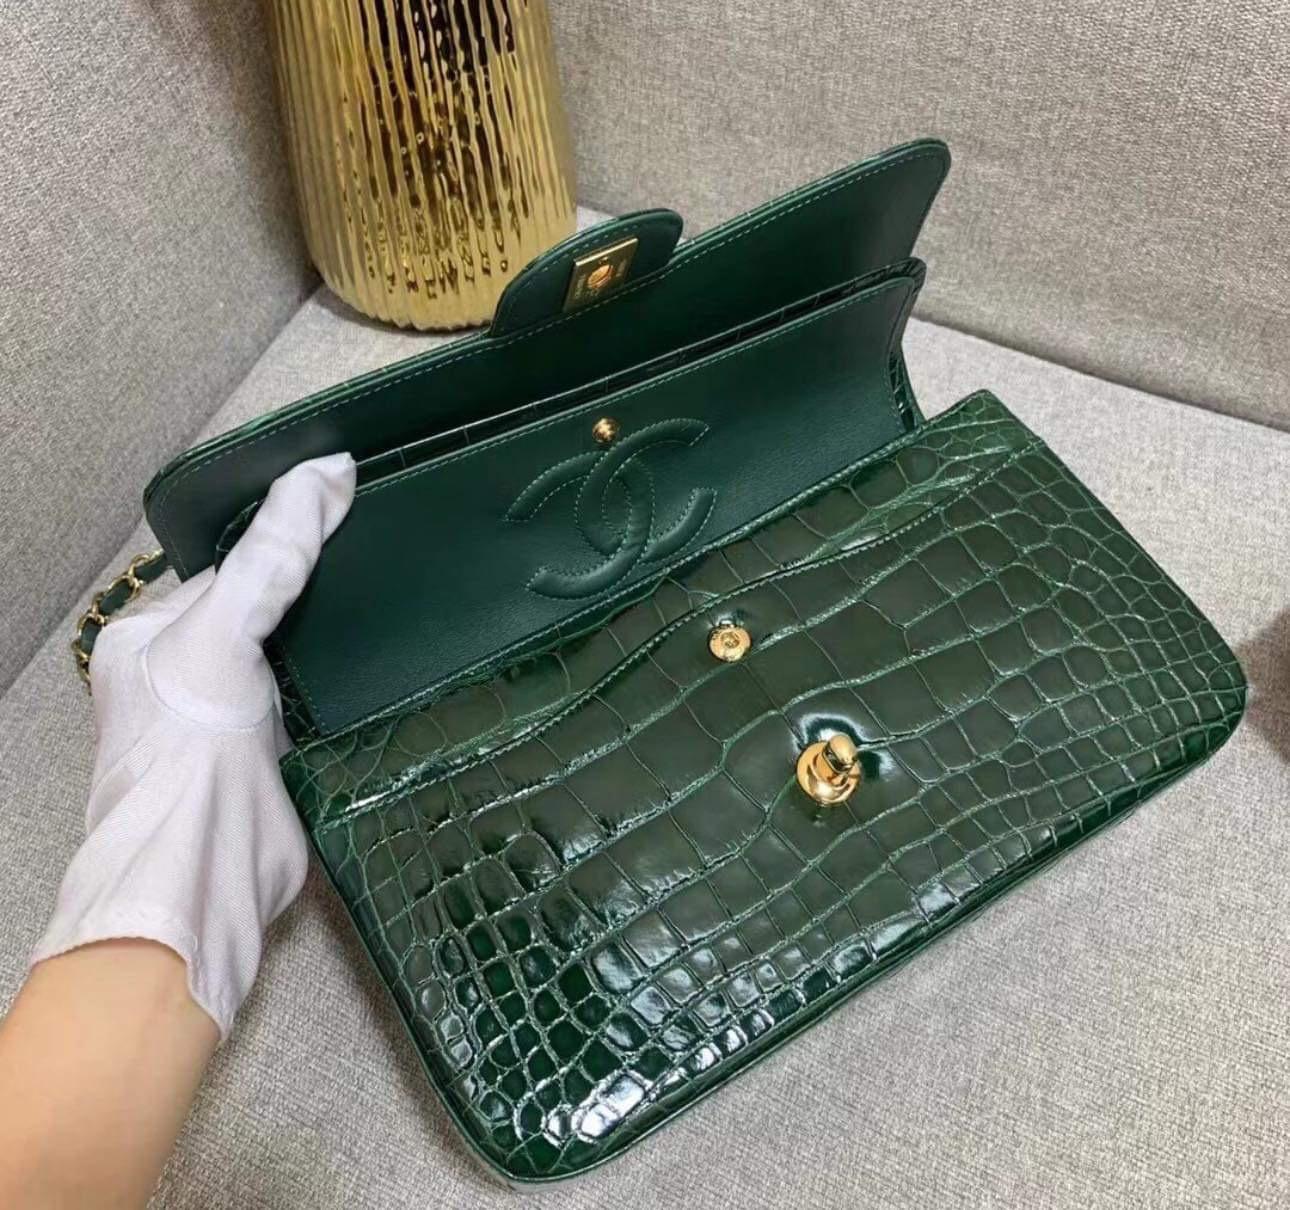 Crafted in France from exotic alligator leather in a highly sought after shade of emerald green, this iconic flap bag by Chanel is finished with the classic CC turn-lock in gold-tone hardware and features a fold-over top, a main internal